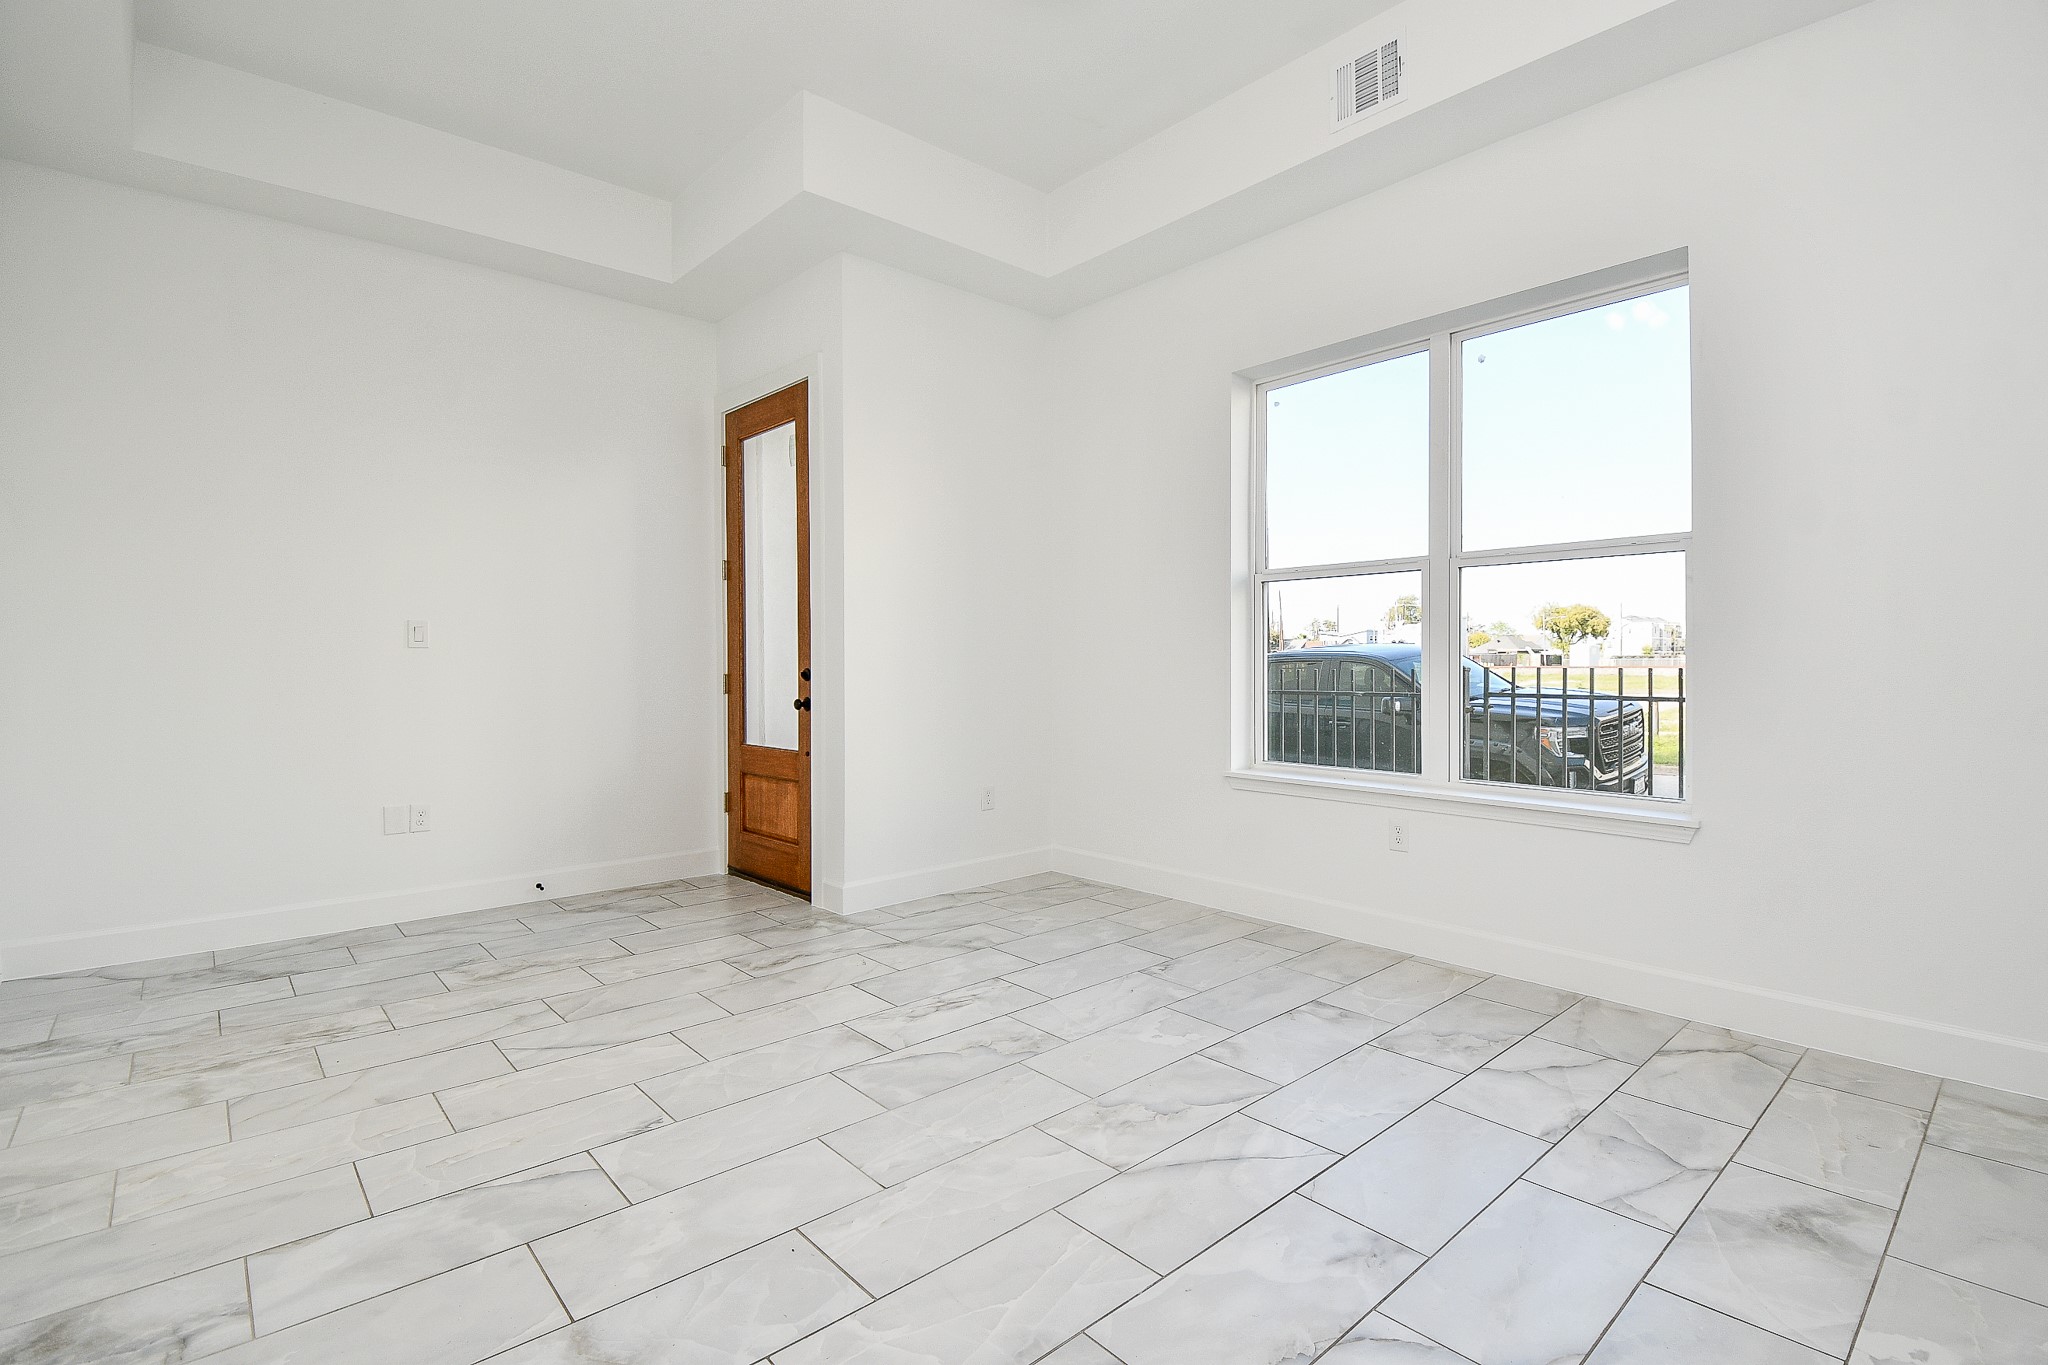 This is the view of your main entrance, from the inside, with cool toned walls, tile flooring and big windows for great natural light. Featured in this gorgeous 3-story home are 3 bedrooms, 3-1/2 baths, occupying a 2,316 square-foot-lot with 2,105 of lush interior living space.